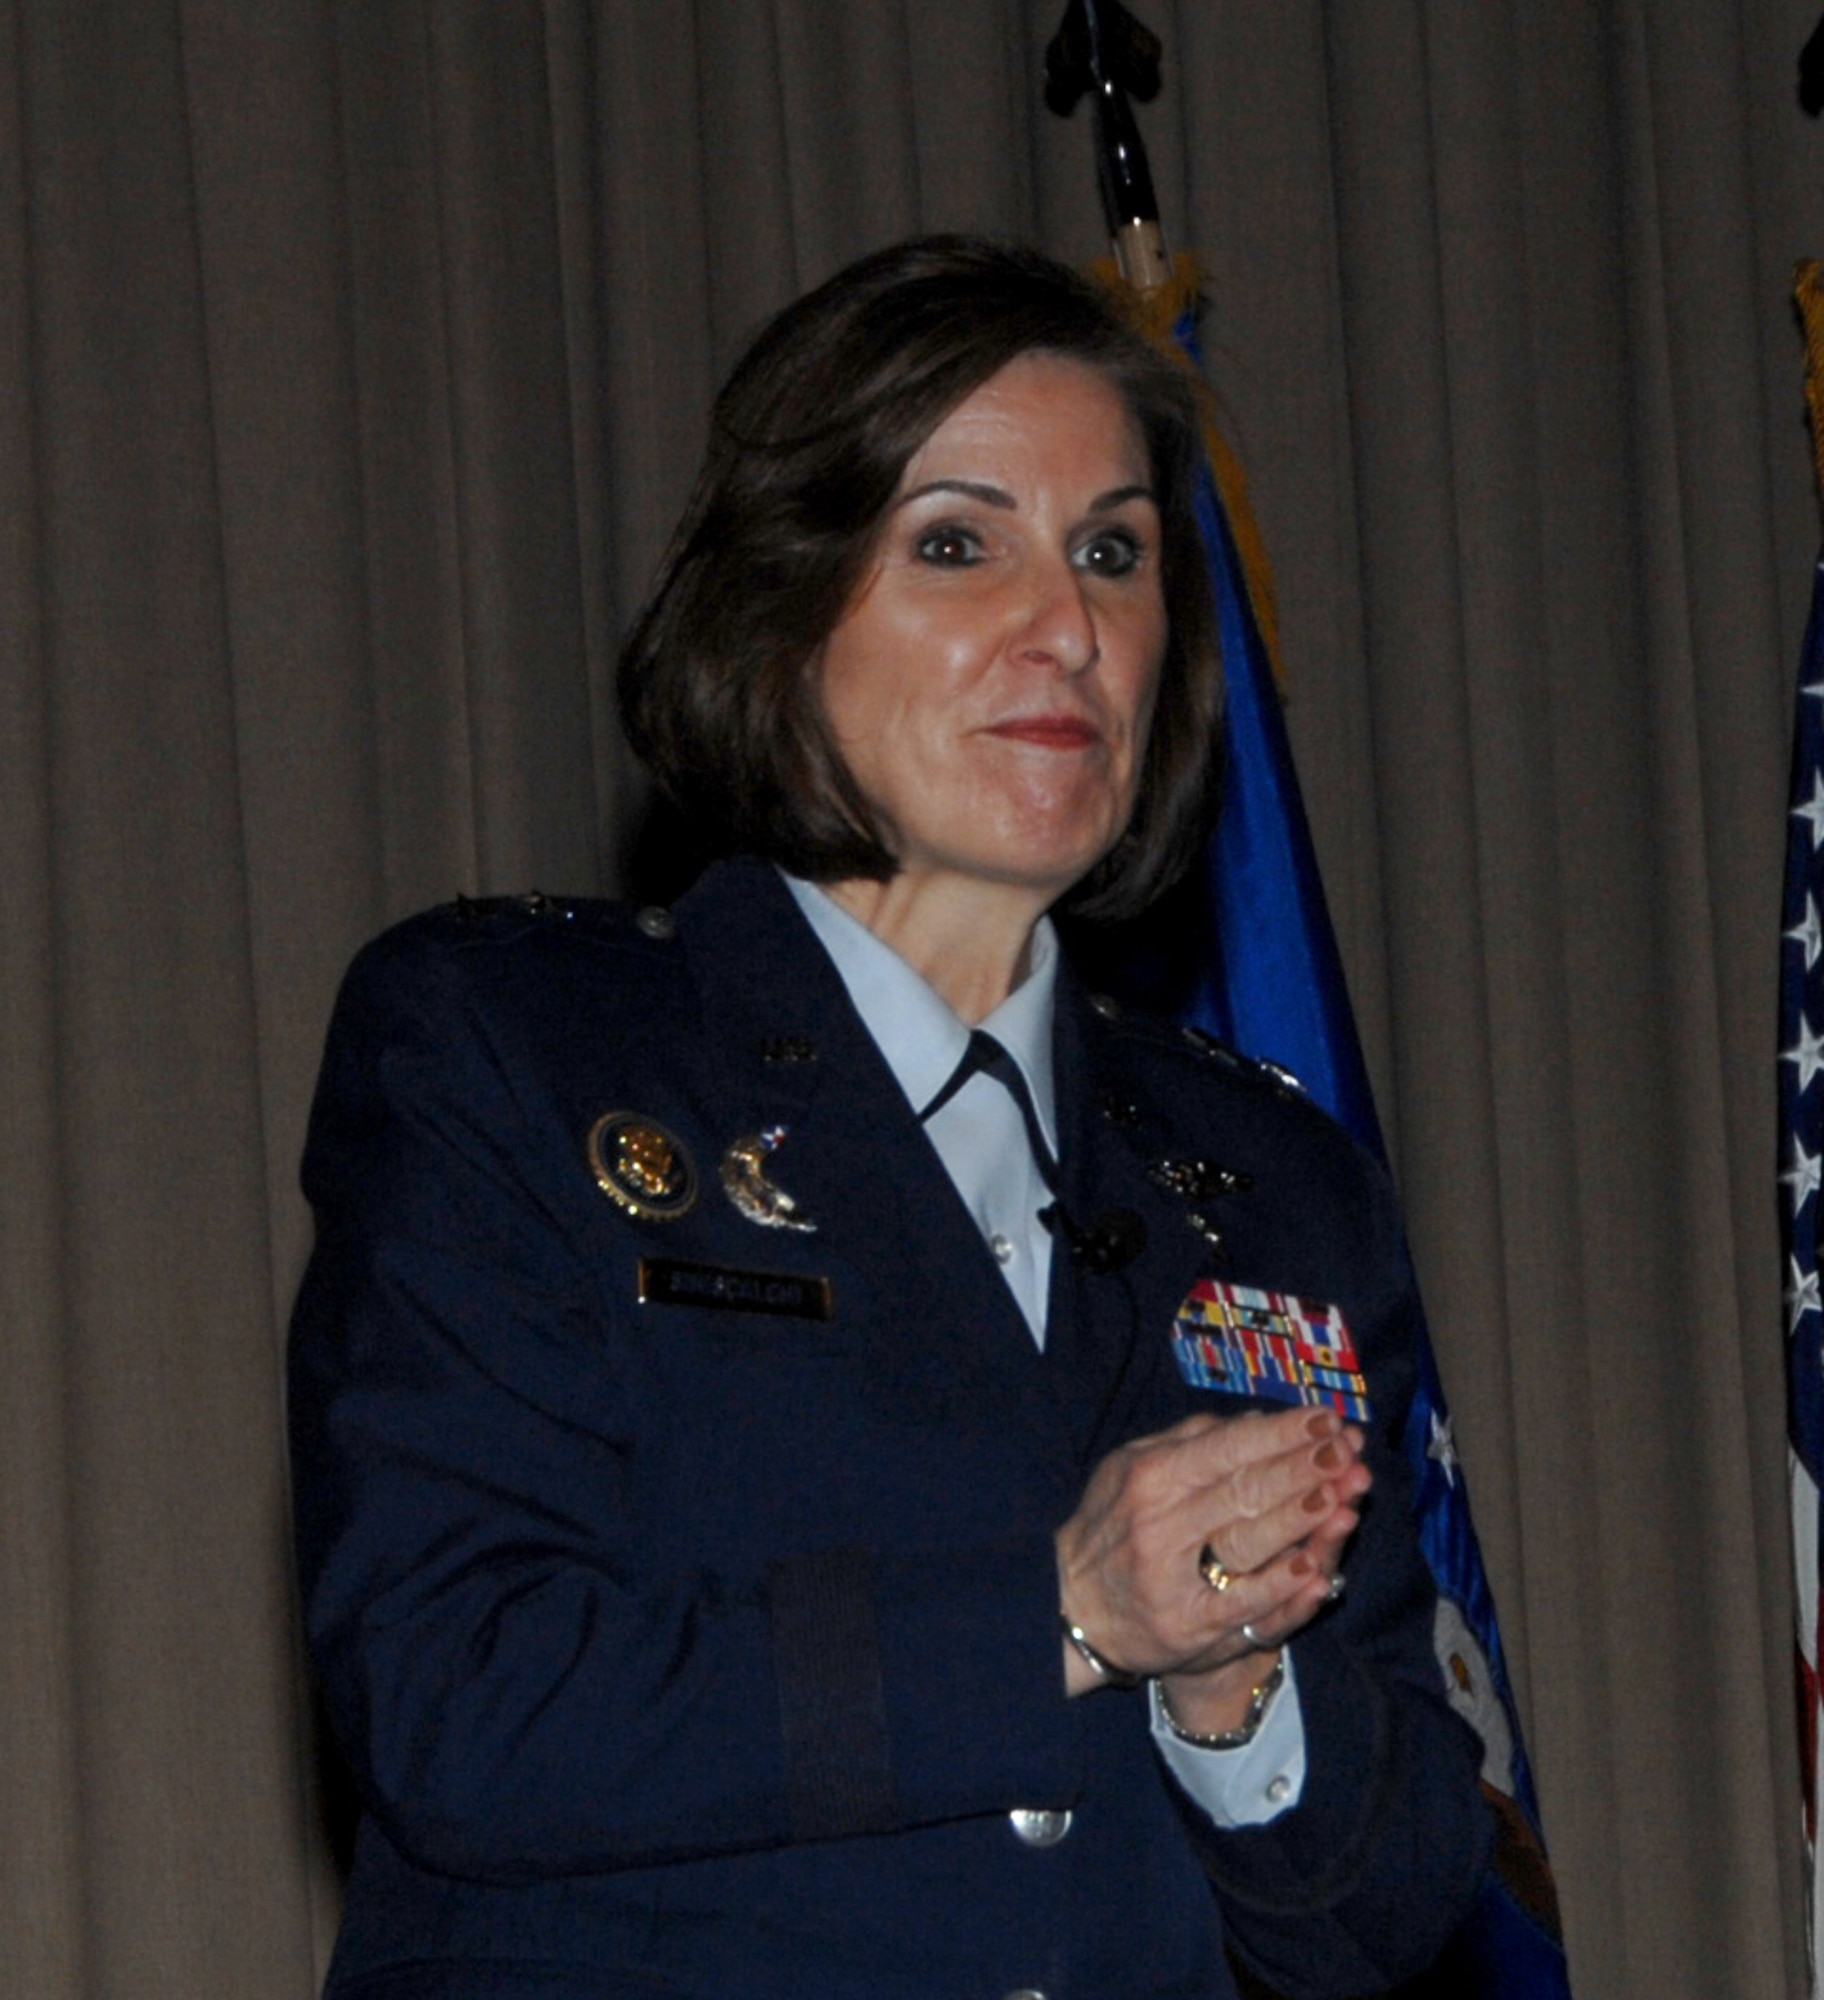 Maj. Gen. Kimberly Siniscalchi gives opening comments during the 59th Medical Wing second annual Nursing Research Day Jan. 27, 2012, at Wilford Hall Ambulatory Surgical Center, Lackland Air Force Base, Texas. The event’s theme was “Creating a Culture of Inquiry” and included nursing briefings and poster presentations. Siniscalchi is assistant Air Force Surgeon General, Medical Force Development, and assistant Air Force Surgeon General, Nursing Services.  (U.S. Air Force photo by Harold China)